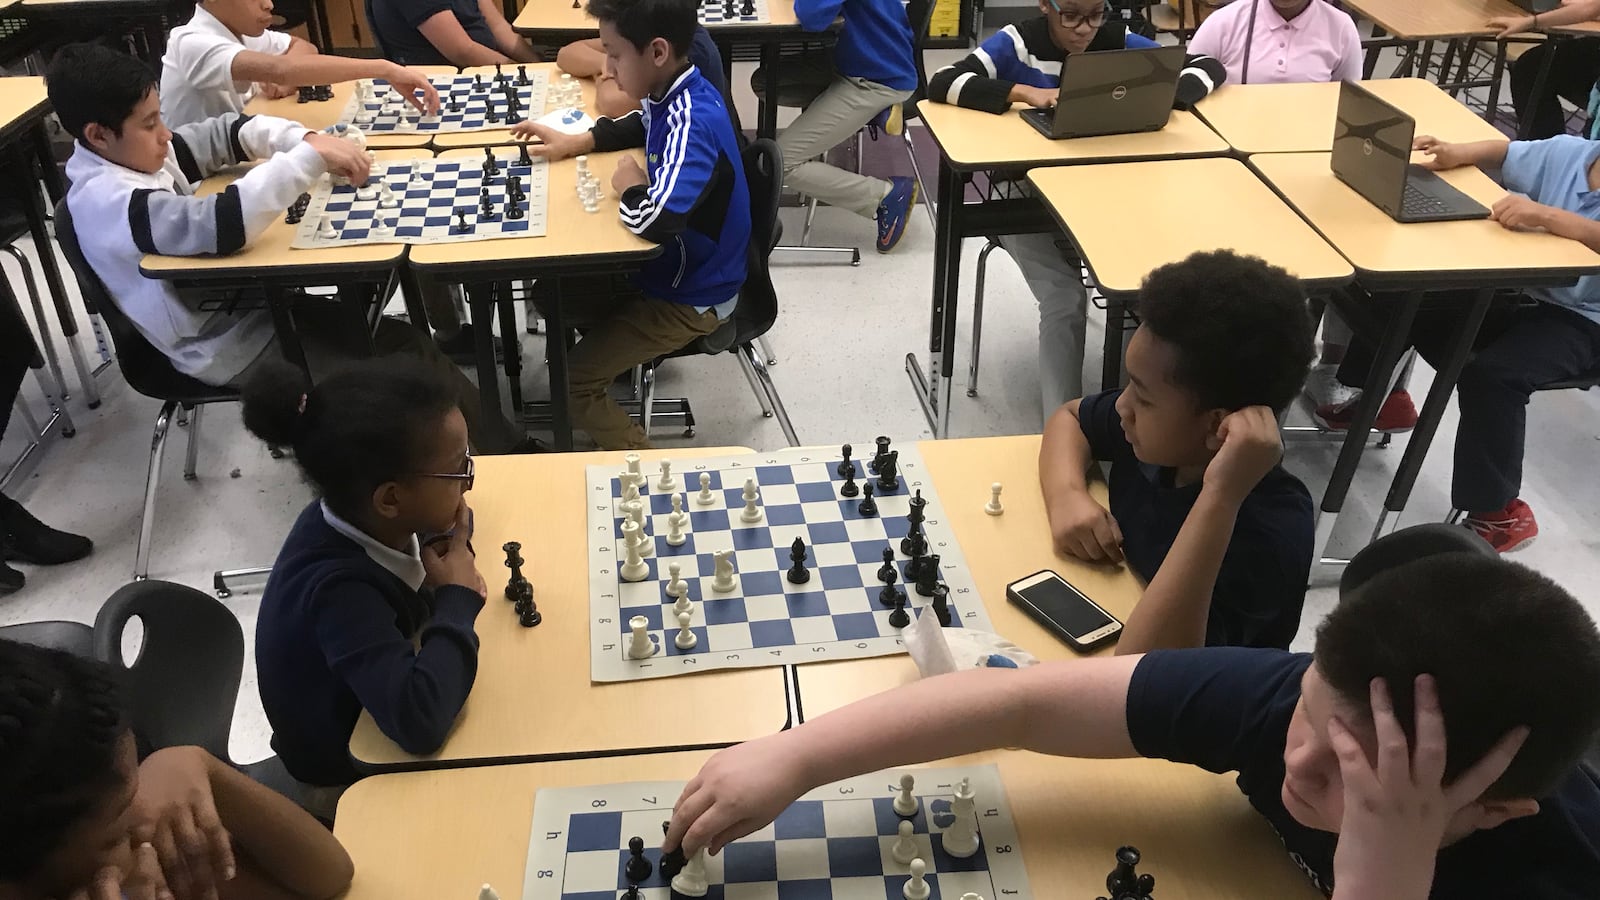 Mia Singleton, left, and Shaun Tinker, both in foreground, engage in a chess game during practice Tuesday at Munger Elementary-Middle School in Detroit